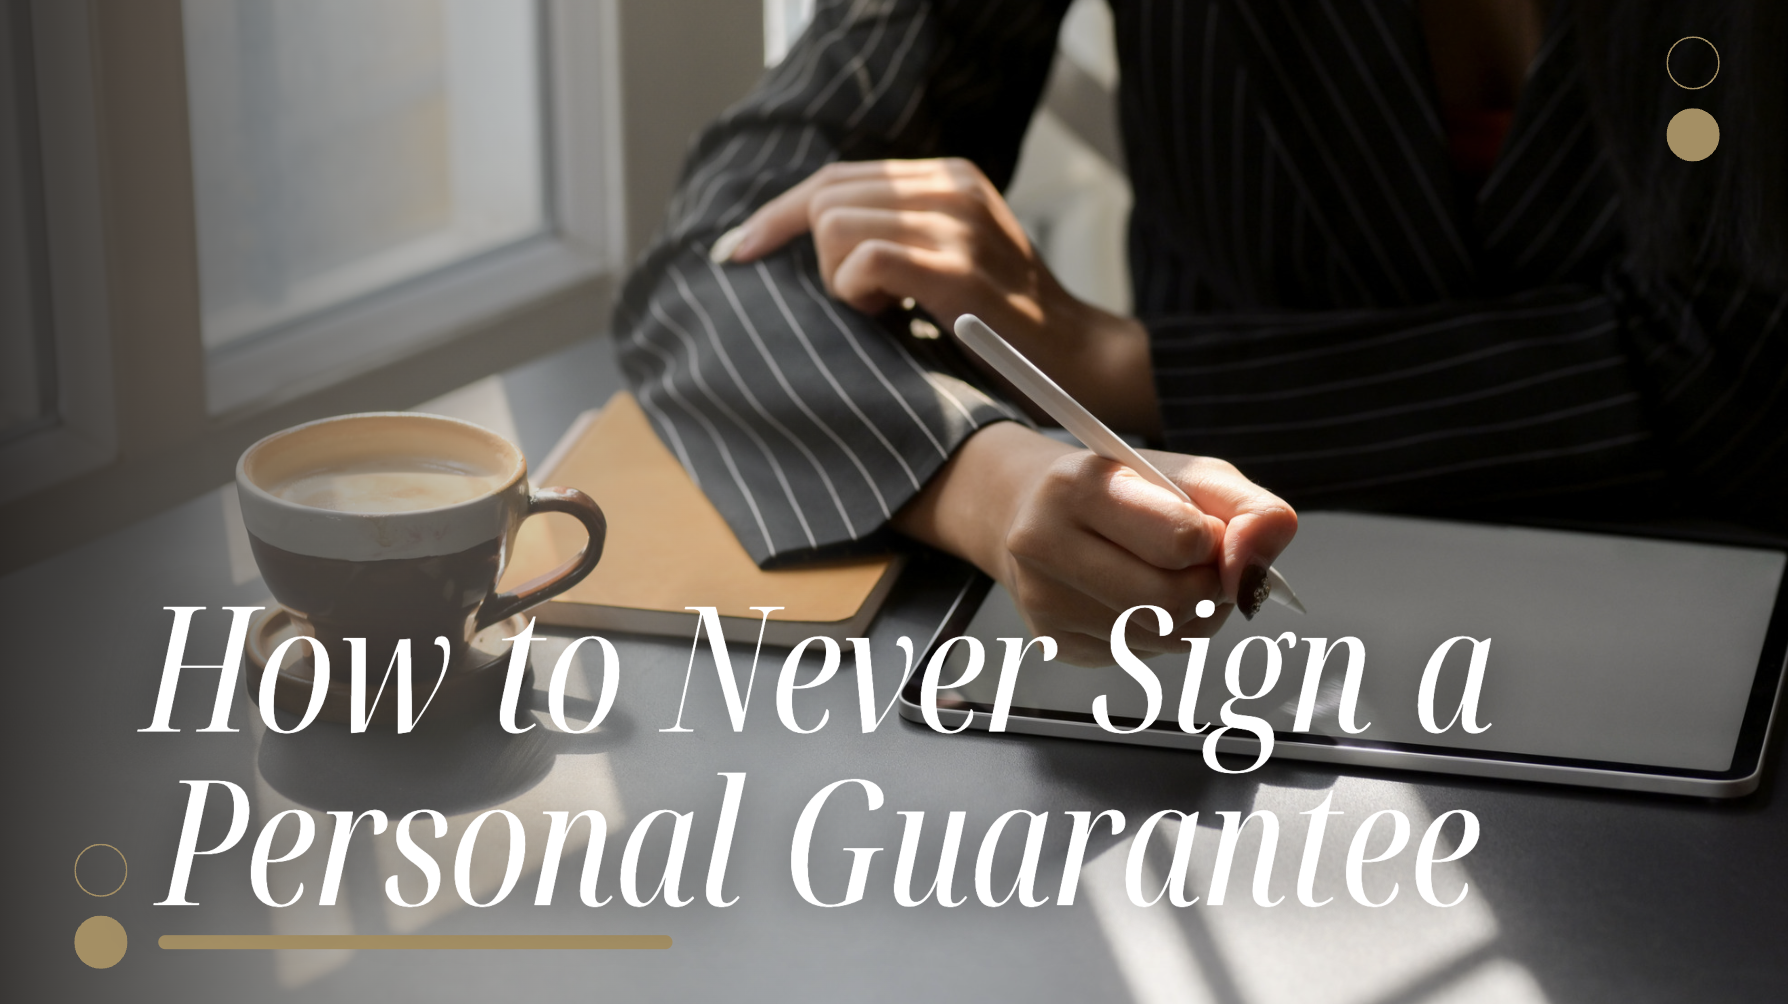 How to Never Sign a Personal Guarantee